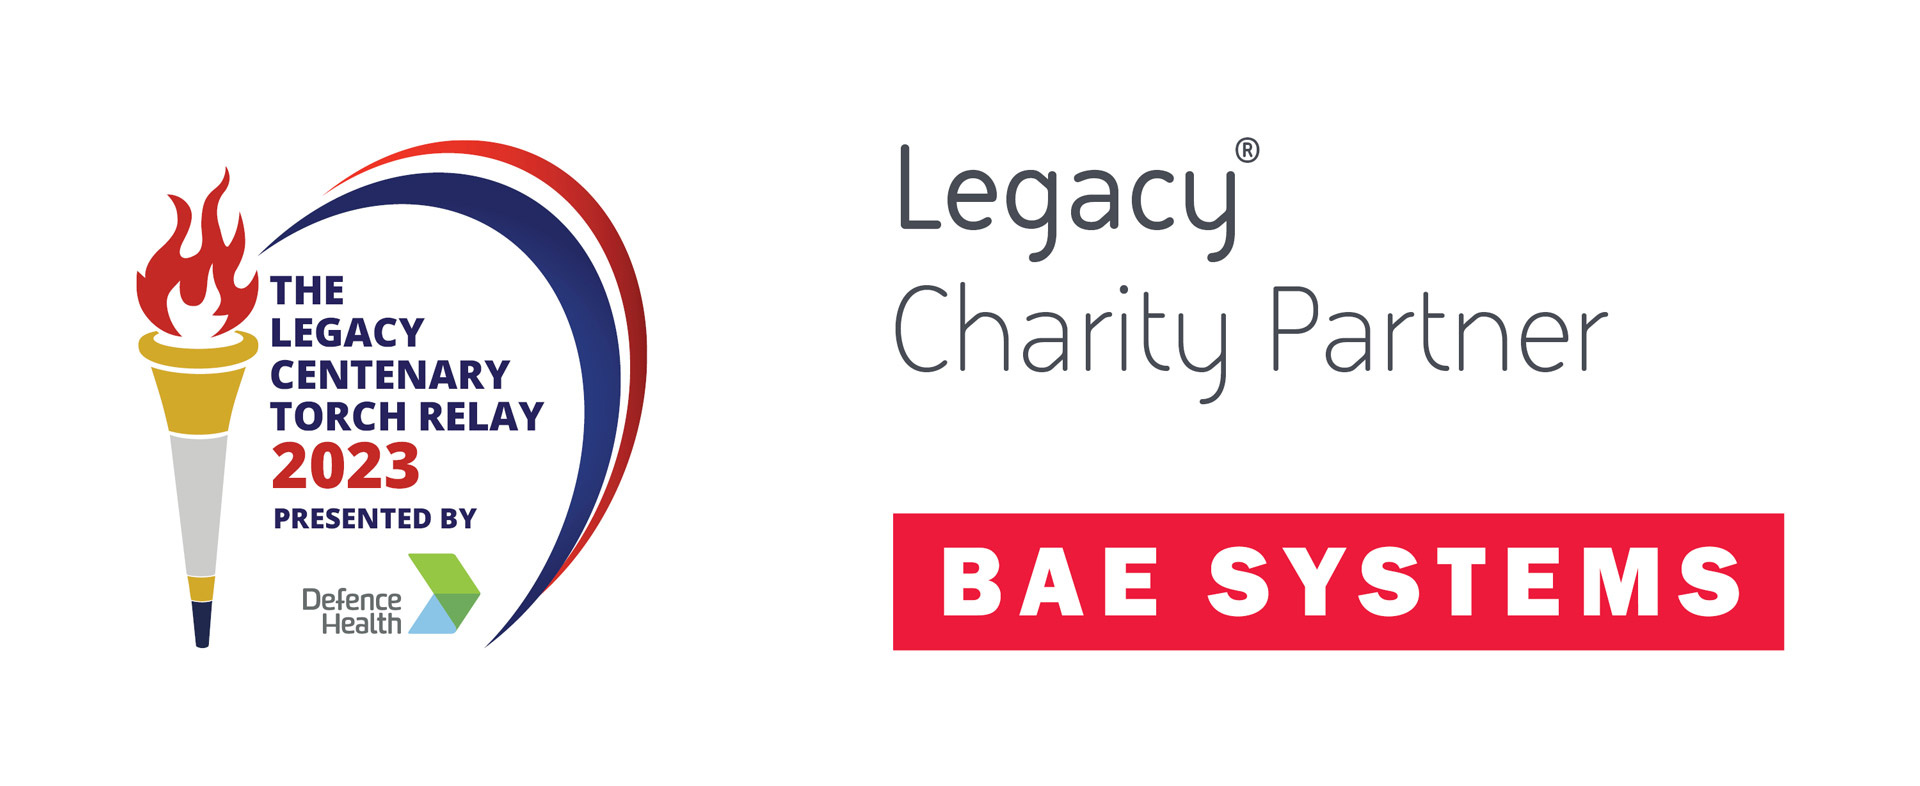 Legacy Centenary Torch Relay BAE Systems